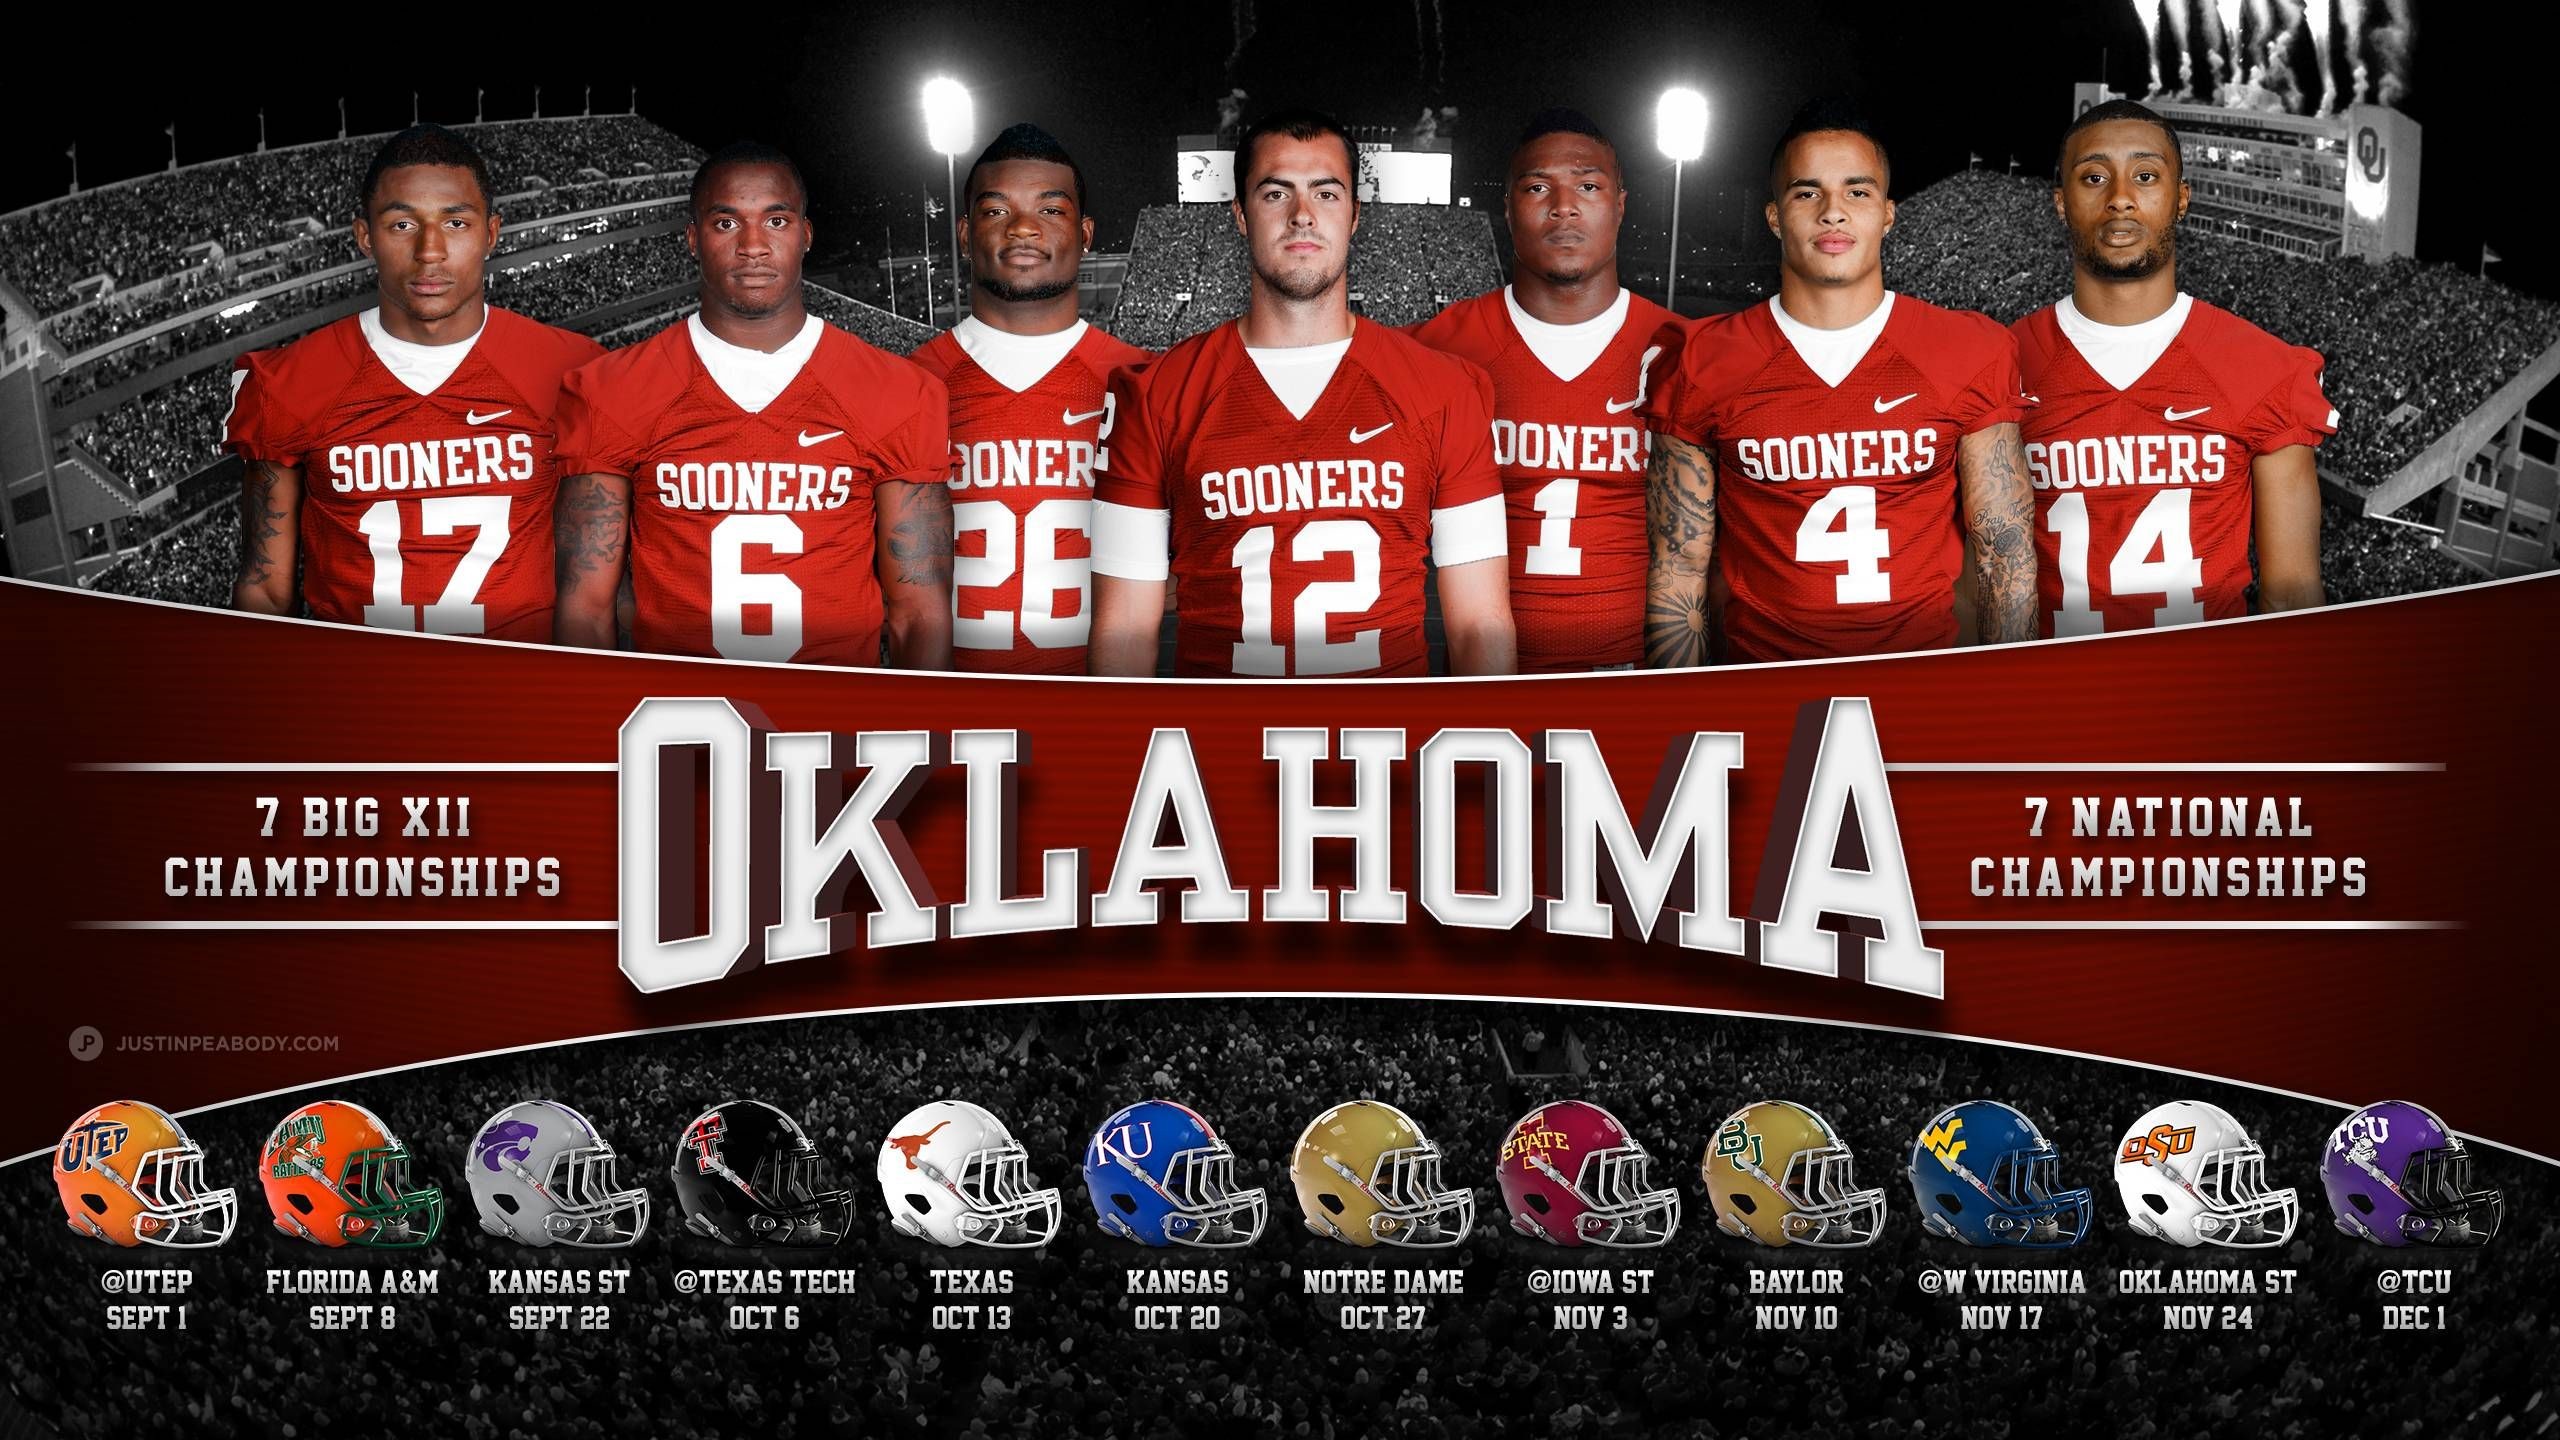 2560x1440, Oklahoma Sooners Chrome Wallpapers, Browser - Oklahoma Football Roster 2019 - HD Wallpaper 